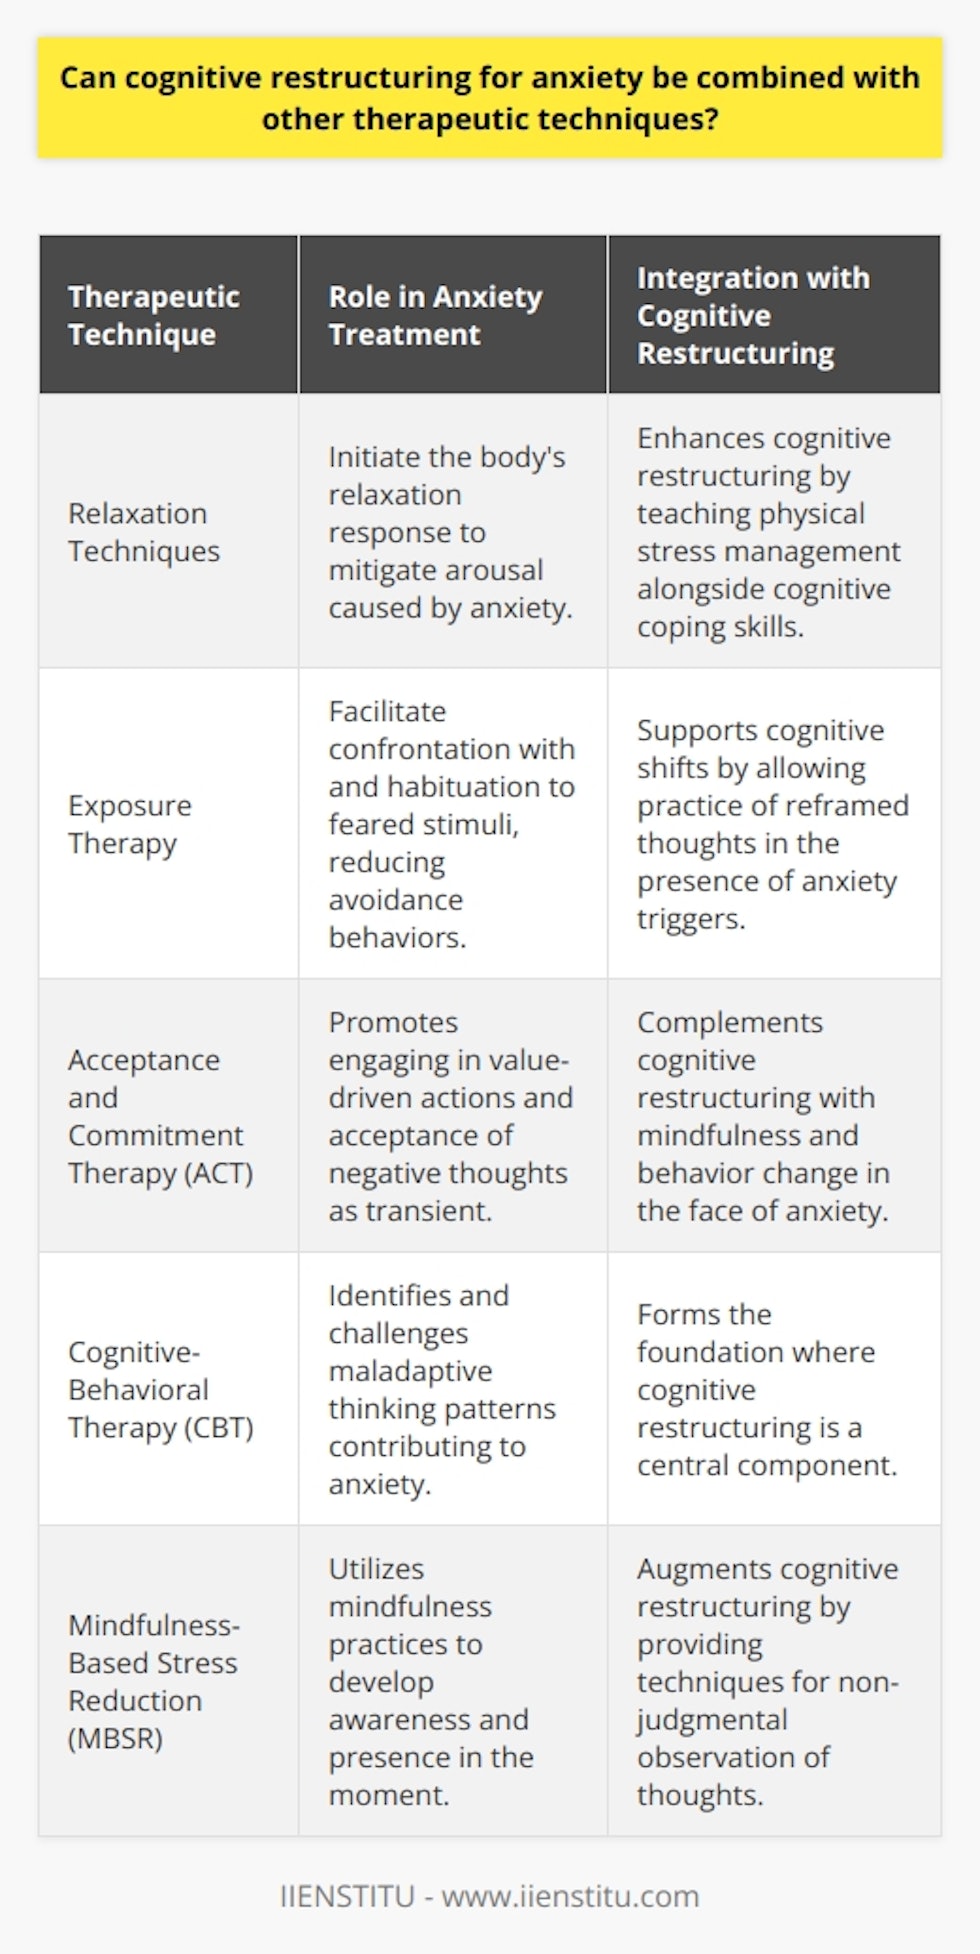 Cognitive restructuring for anxiety is a versatile psychological strategy that can be seamlessly integrated with various therapeutic techniques. This integrated approach often enhances the efficacy of treatment for anxiety disorders. Cognitive restructuring is a core component of cognitive-behavioral therapy (CBT), which aims to identify and change maladaptive thinking patterns that contribute to anxiety, replacing them with more balanced and rational thoughts. Relaxation TechniquesOne of the therapeutic techniques that complement cognitive restructuring is the implementation of relaxation techniques. These techniques are designed to reduce anxiety by eliciting the body's natural relaxation response, counteracting the heightened state of arousal that accompanies anxiety. Relaxation techniques such as deep-breathing exercises, progressive muscle relaxation, and guided imagery can help individuals achieve a sense of calm. When relaxation strategies are incorporated alongside cognitive restructuring, the individual learns not only how to cognitively cope with anxiety-inducing thoughts but also how to physically manage the stress response.Exposure TherapyExposure therapy is another powerful technique that can be integrated with cognitive restructuring. As a critical part of behavioral therapy, exposure therapy involves intentional confrontation with feared stimuli or situations, allowing the individual to face and ultimately reduce their fear through repeated exposures. When combined with cognitive restructuring, individuals can not only practice new cognitive skills in a controlled environment but also challenge their irrational fears in real life, thereby gaining confidence and mastery over their anxiety.Acceptance and Commitment Therapy (ACT)In recent years, Acceptance and Commitment Therapy (ACT) has emerged as a complementary approach to cognitive restructuring. ACT emphasizes acceptance of negative thoughts and feelings, recognizing them as transient experiences without attempting to change them. Instead, ACT focuses on engaging in values-driven, committed actions despite the presence of negative internal experiences. When syncretized with cognitive restructuring techniques, ACT can bolster the individual’s ability to handle anxiety-provoking thoughts with a dual lens of cognitive reframing and mindful acceptance.Overall, blending cognitive restructuring with relaxation exercises, exposure therapy, or ACT can lead to a robust multifaceted approach to managing anxiety. This combination allows individuals to employ a variety of strategies to confront their anxious thoughts and reactions, thereby empowering them to lead more adaptive and fulfilling lives. Integrating cognitive restructuring with other therapies leverages the strength of different methodologies, providing a well-rounded and individually tailored approach to anxiety treatment.